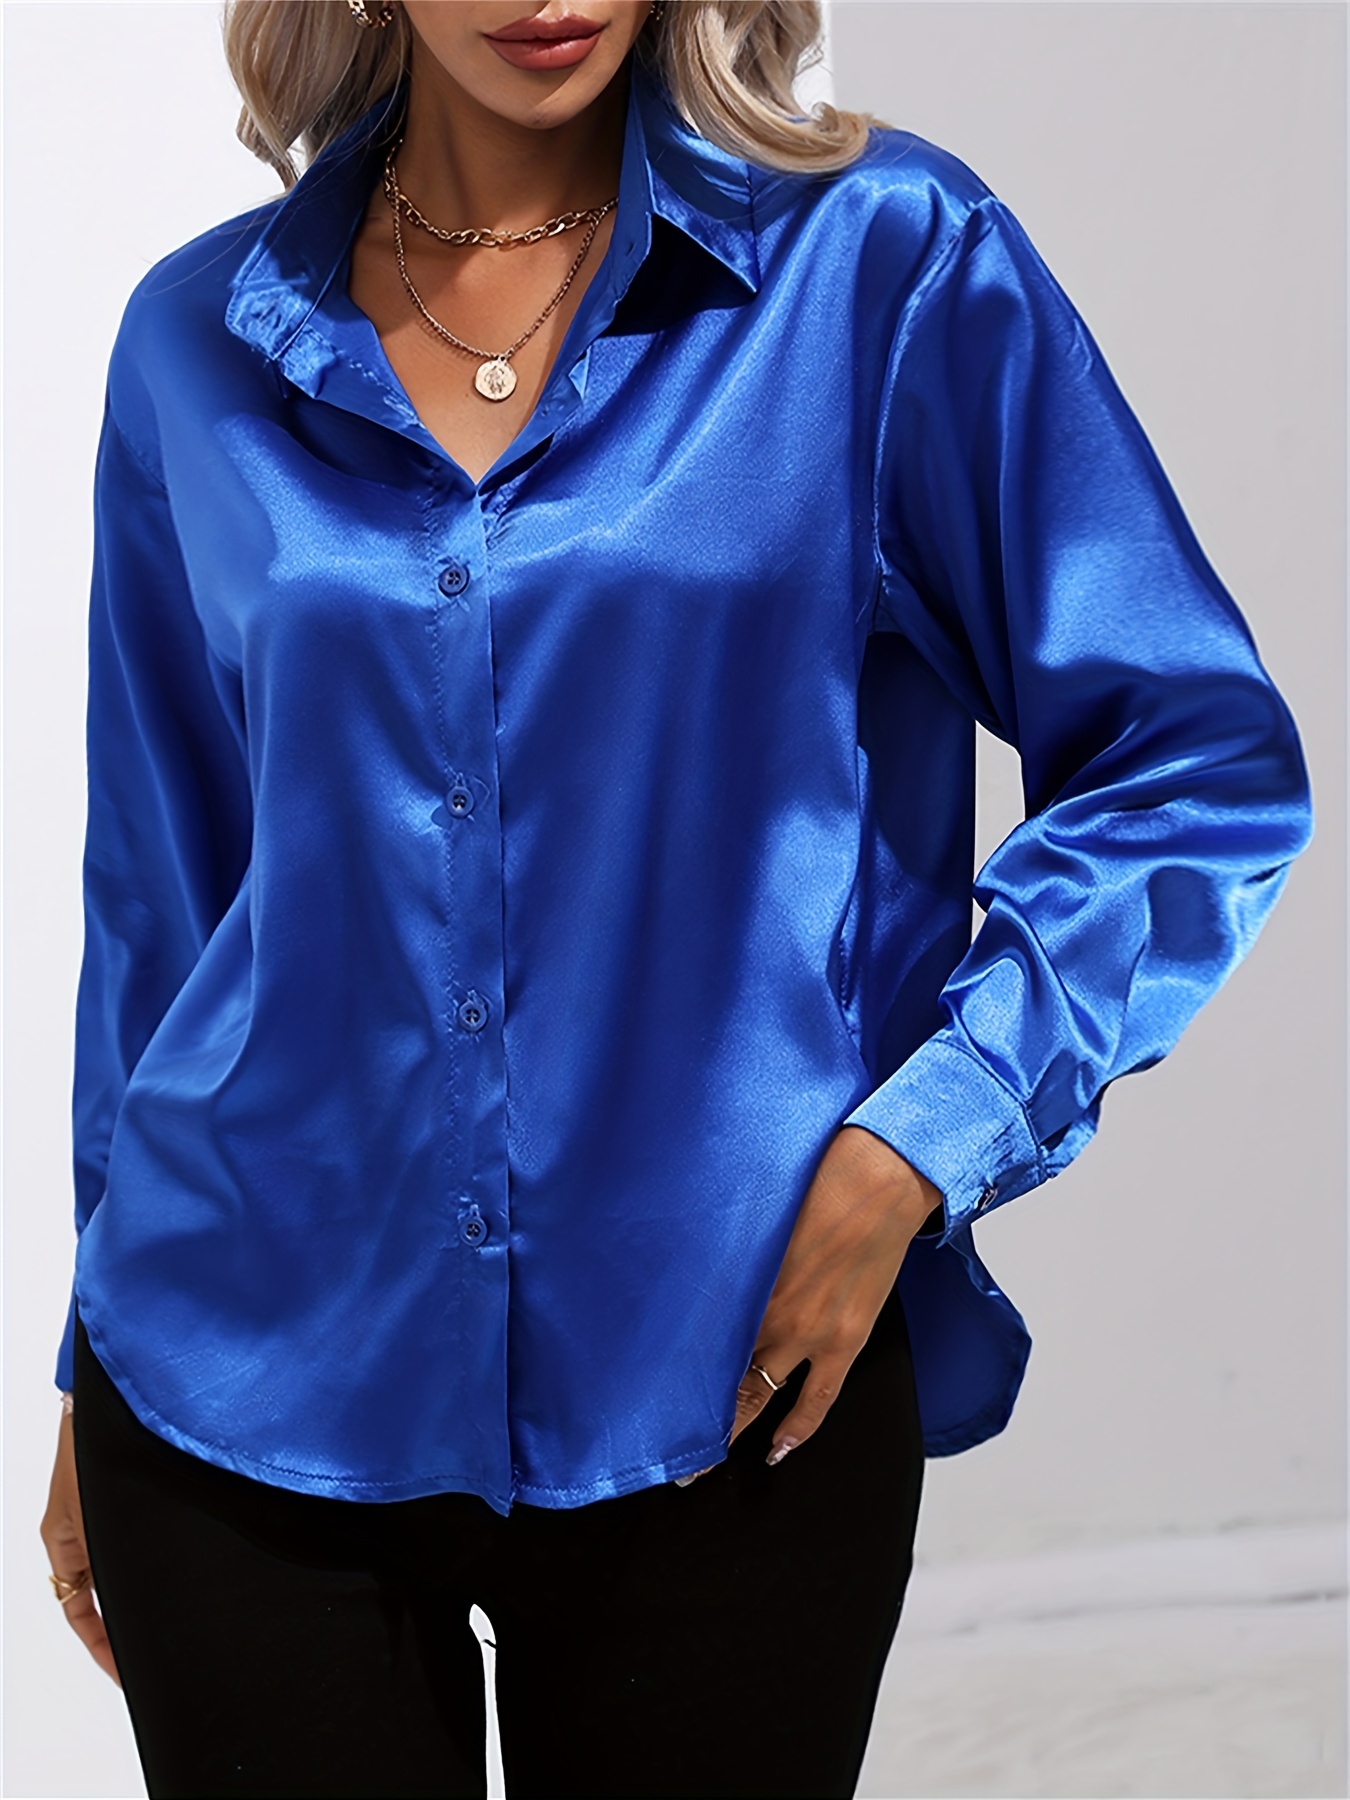 solid smoothly shirt, solid smoothly shirt elegant button front turn down collar long sleeve shirt womens clothing details 40